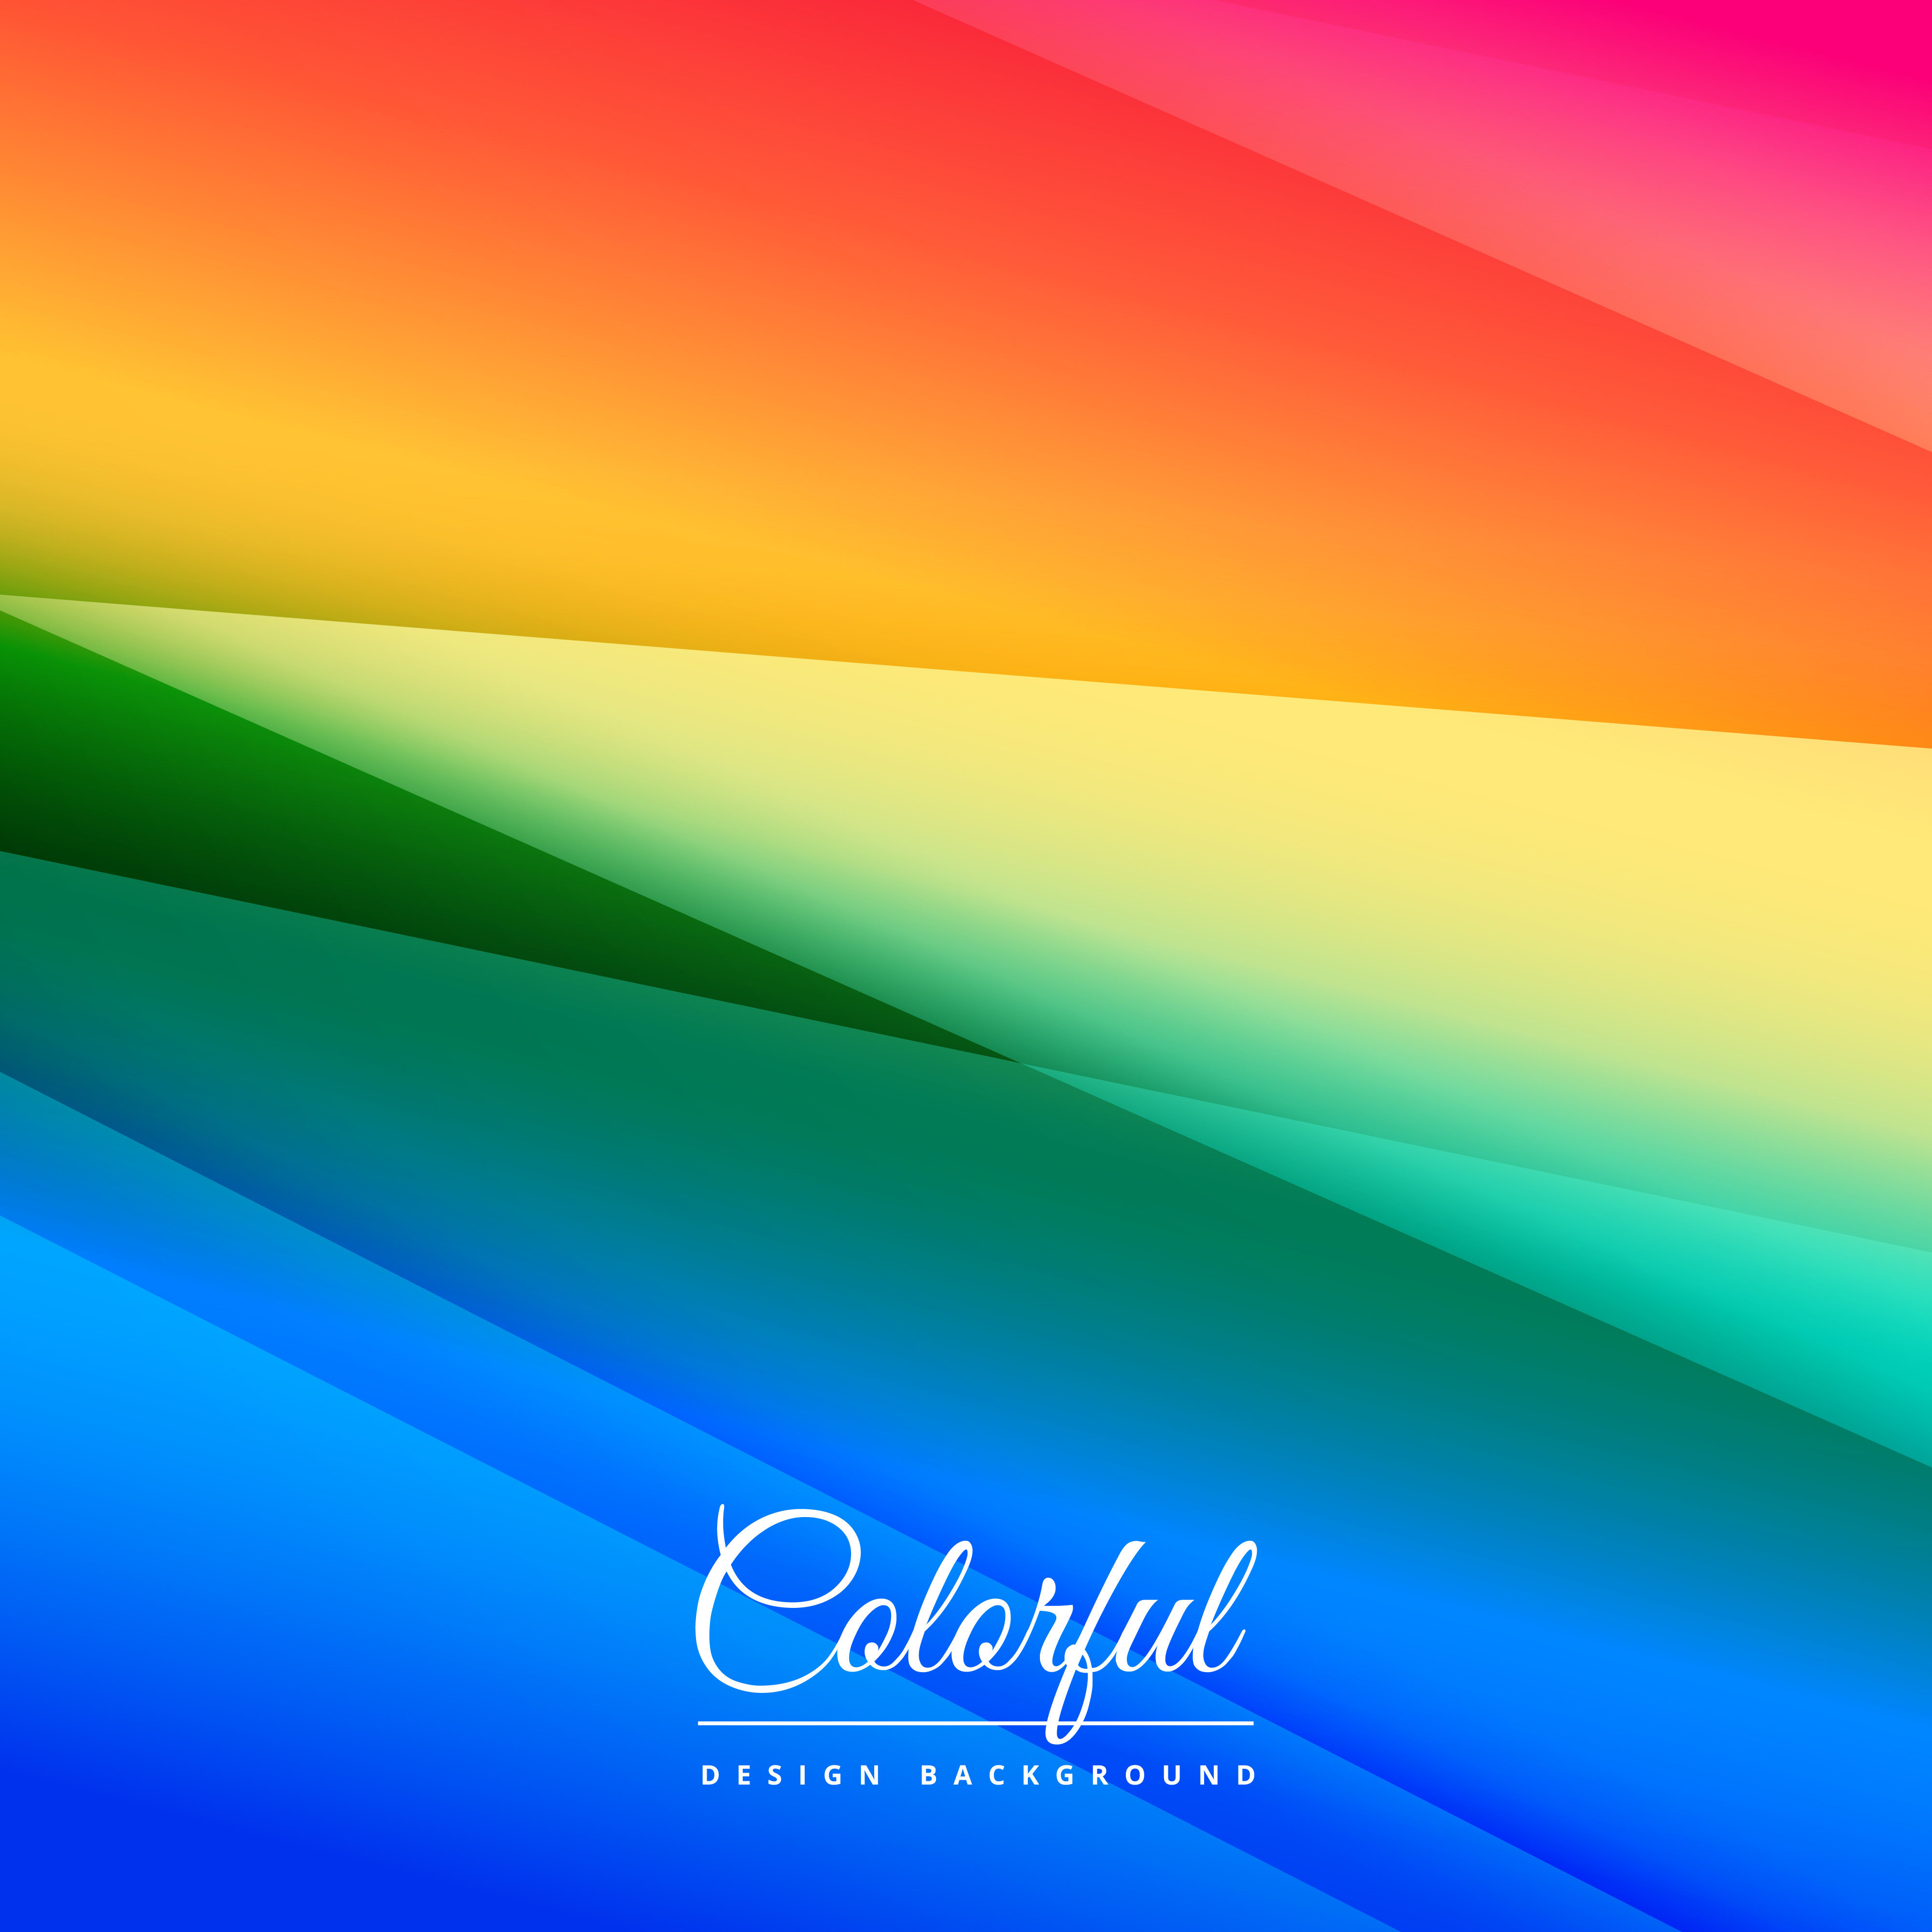 colorful-poster-background-design